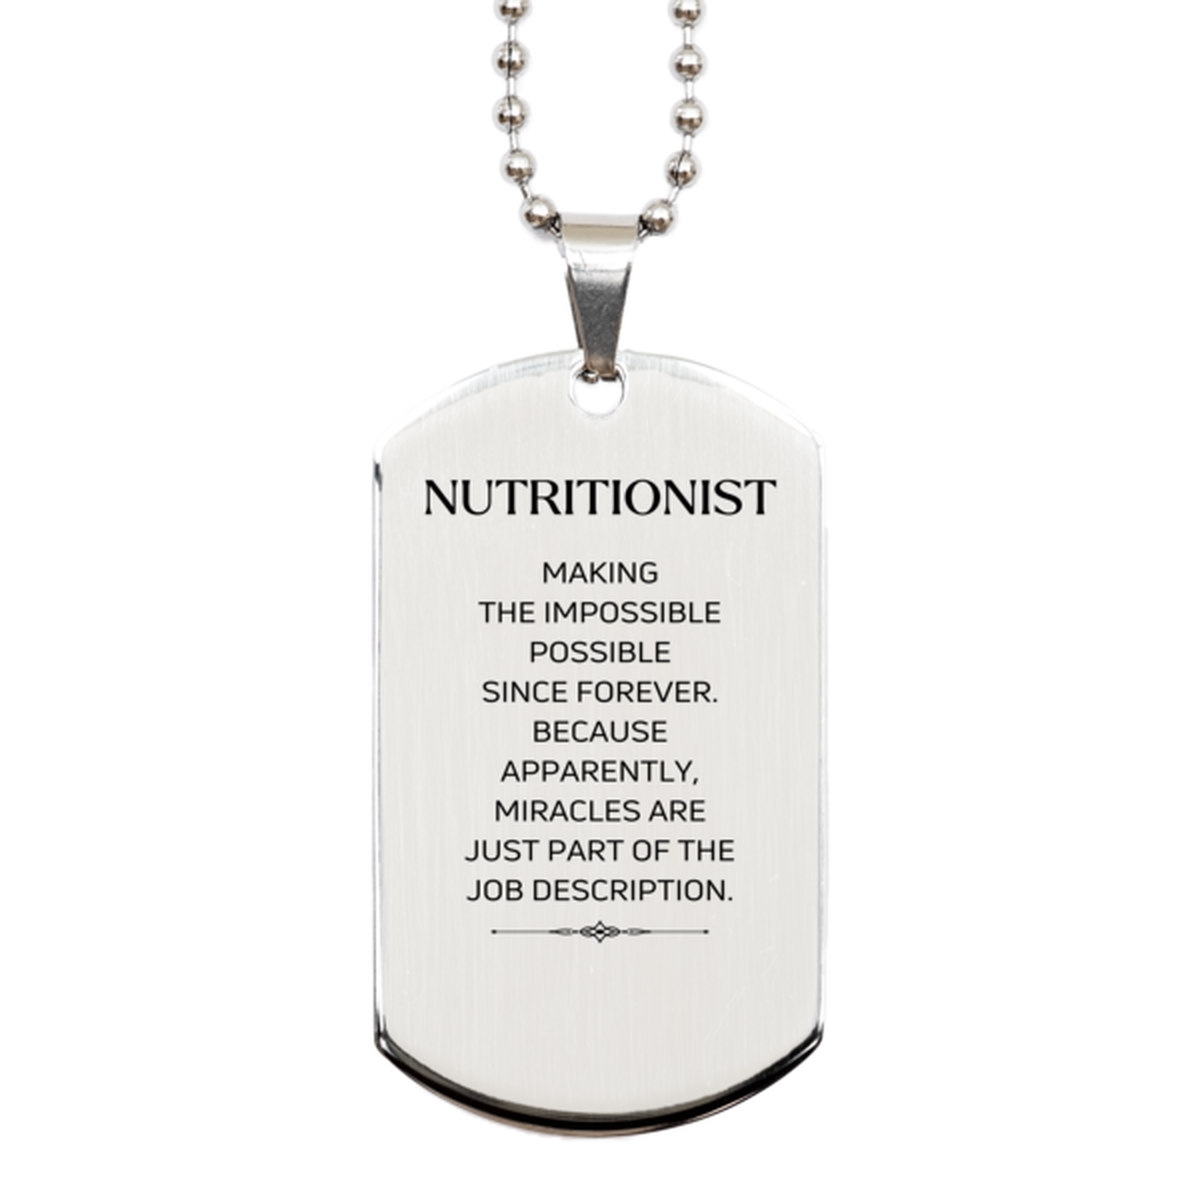 Funny Nutritionist Gifts, Miracles are just part of the job description, Inspirational Birthday Silver Dog Tag For Nutritionist, Men, Women, Coworkers, Friends, Boss